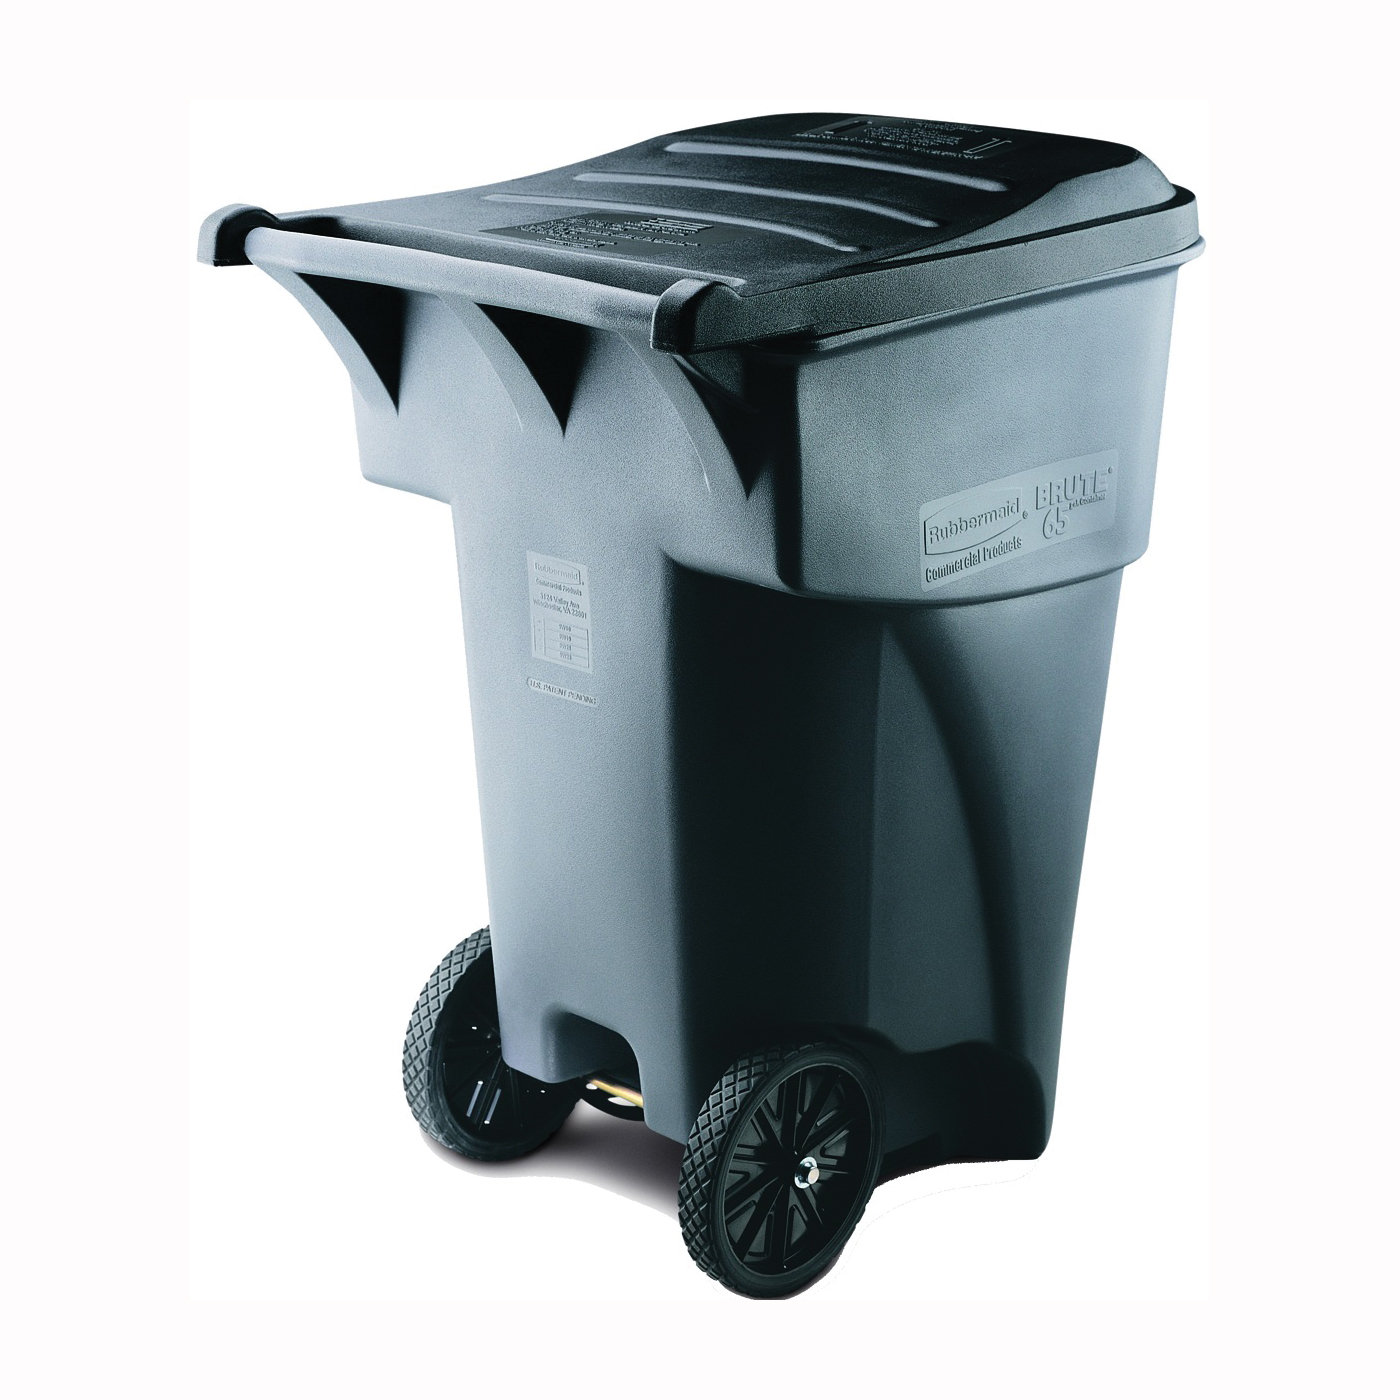 FG9W2200GRAY Rollout Container, 95 gal Capacity, Polyethylene, Gray, Lift Up Closure